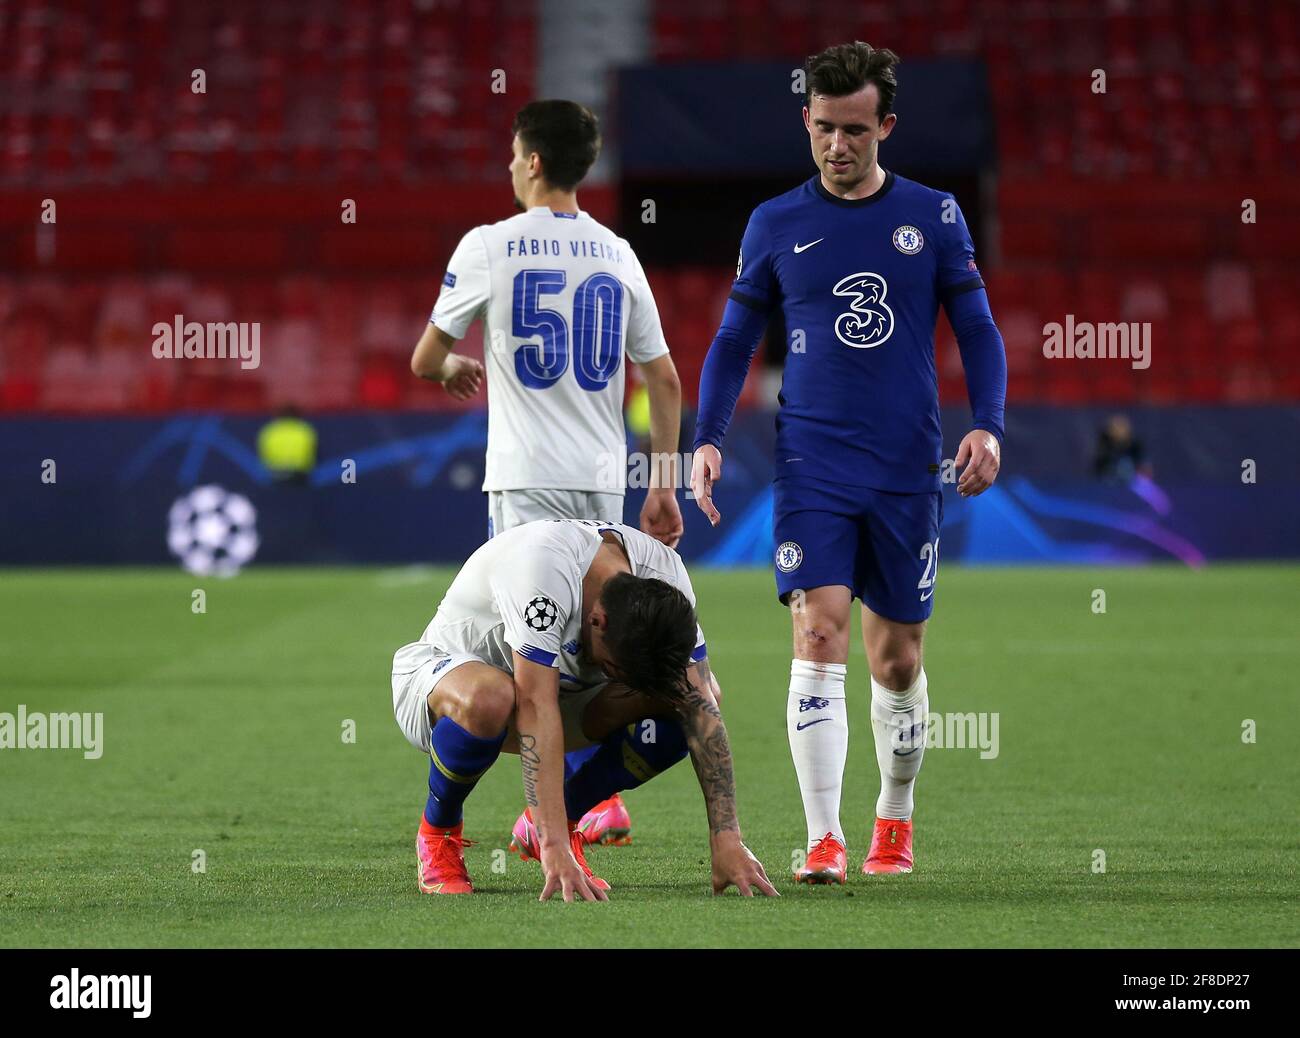 FC Porto's Mateus Uribe (left) appears dejected as Chelsea's Ben Chilwell looks on after the final whistle during the UEFA Champions League match at the Ramon Sanchez-Pizjuan Stadium, Seville. Picture date: Tuesday April 13, 2021. See PA story SOCCER Chelsea. Photo credit should read: Isabel Infantes/PA Wire. RESTRICTIONS: Editorial use only, no commercial use without prior consent from rights holder. Stock Photo